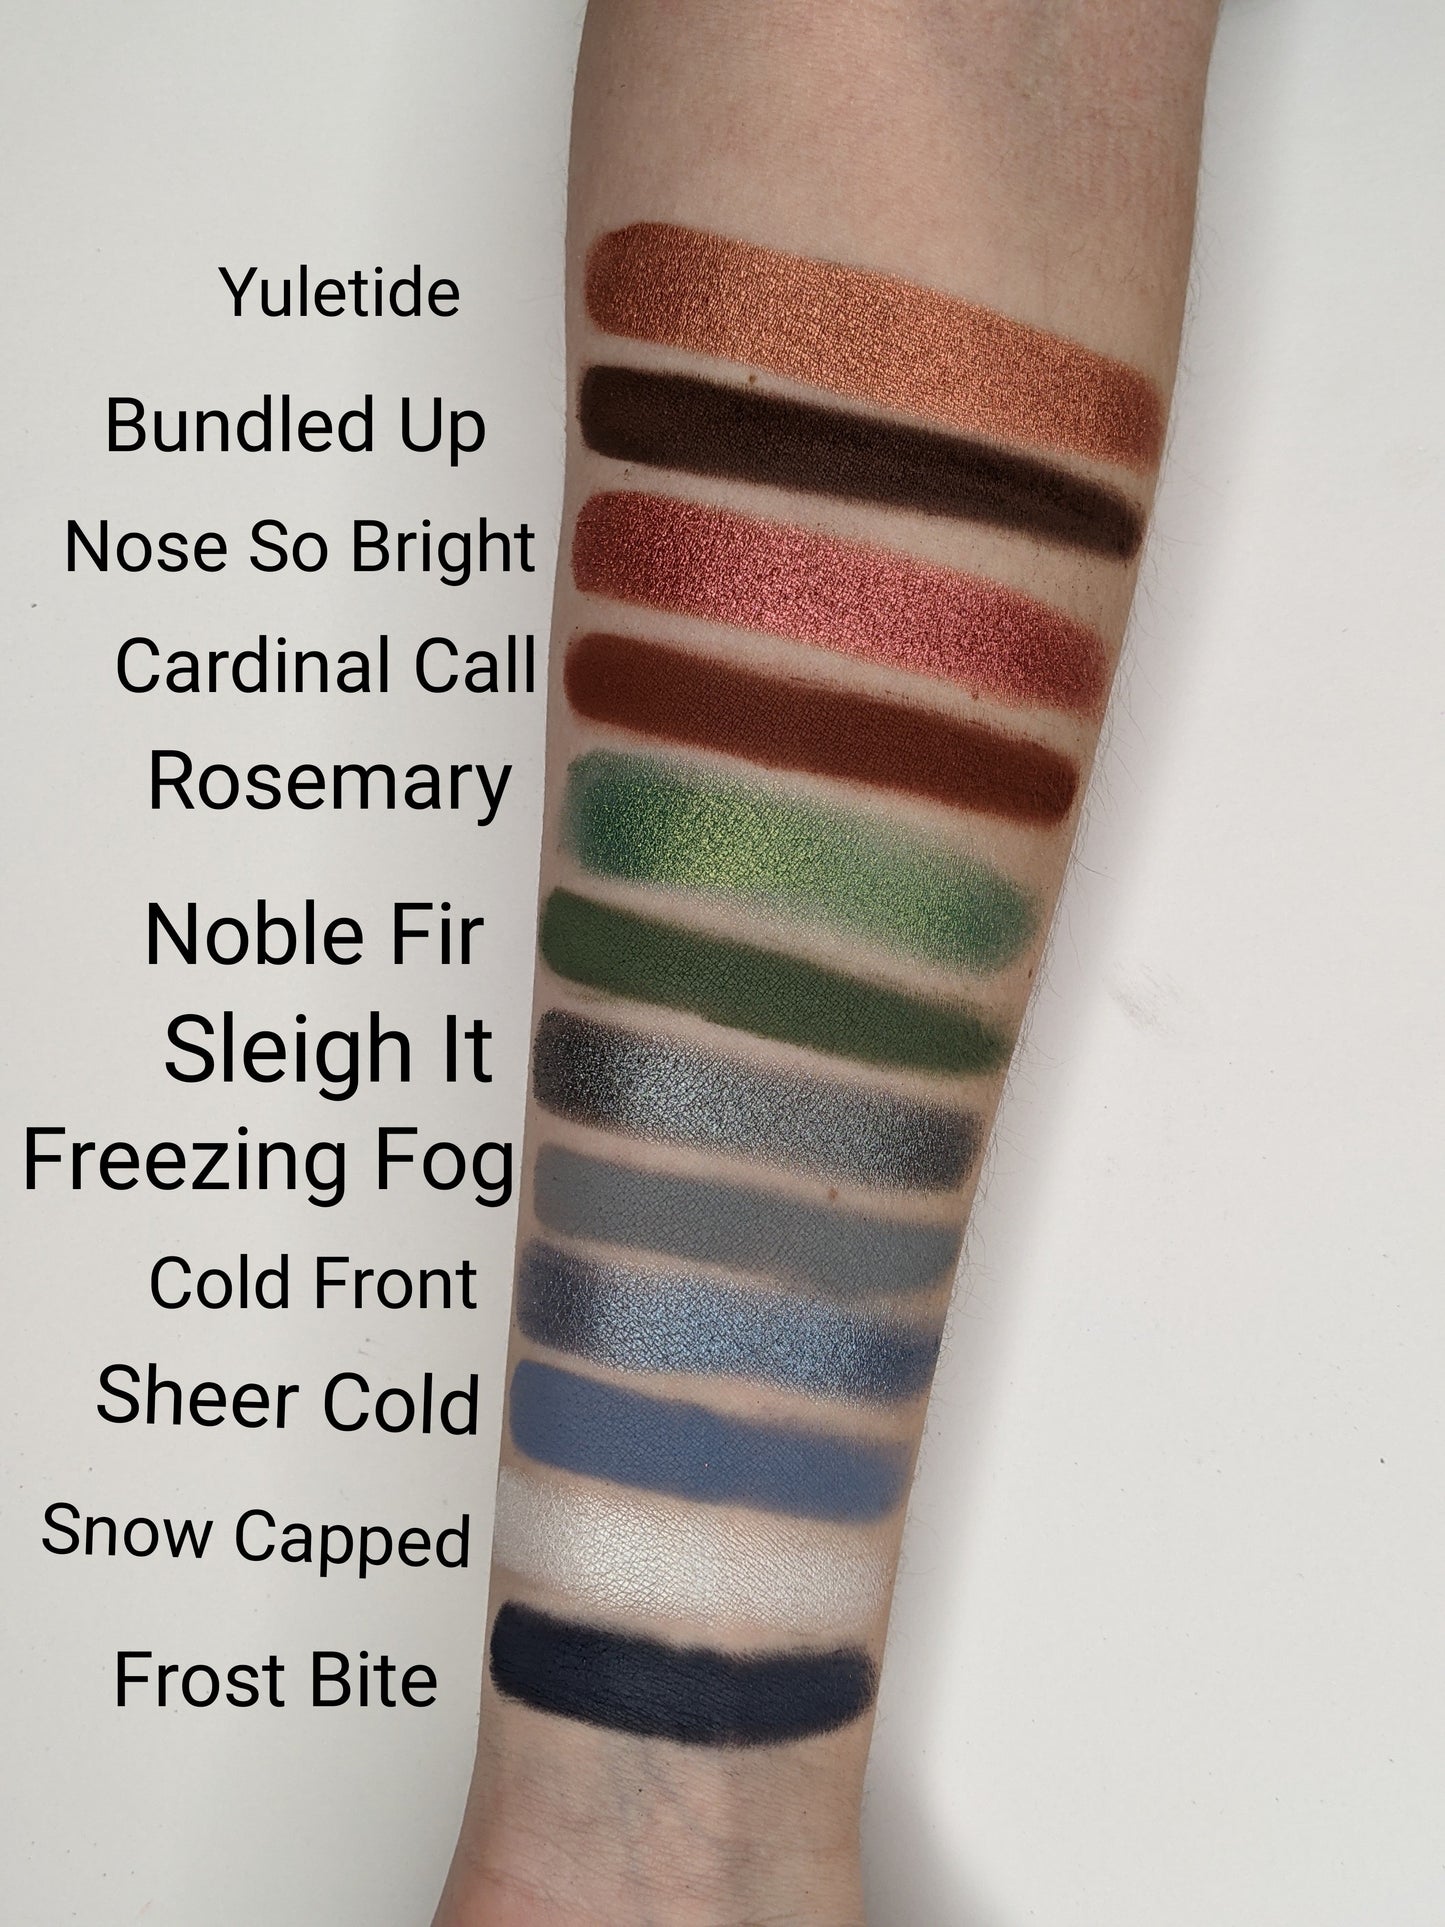 Cold Front - Eyeshadow Shimmery Greyish Blue